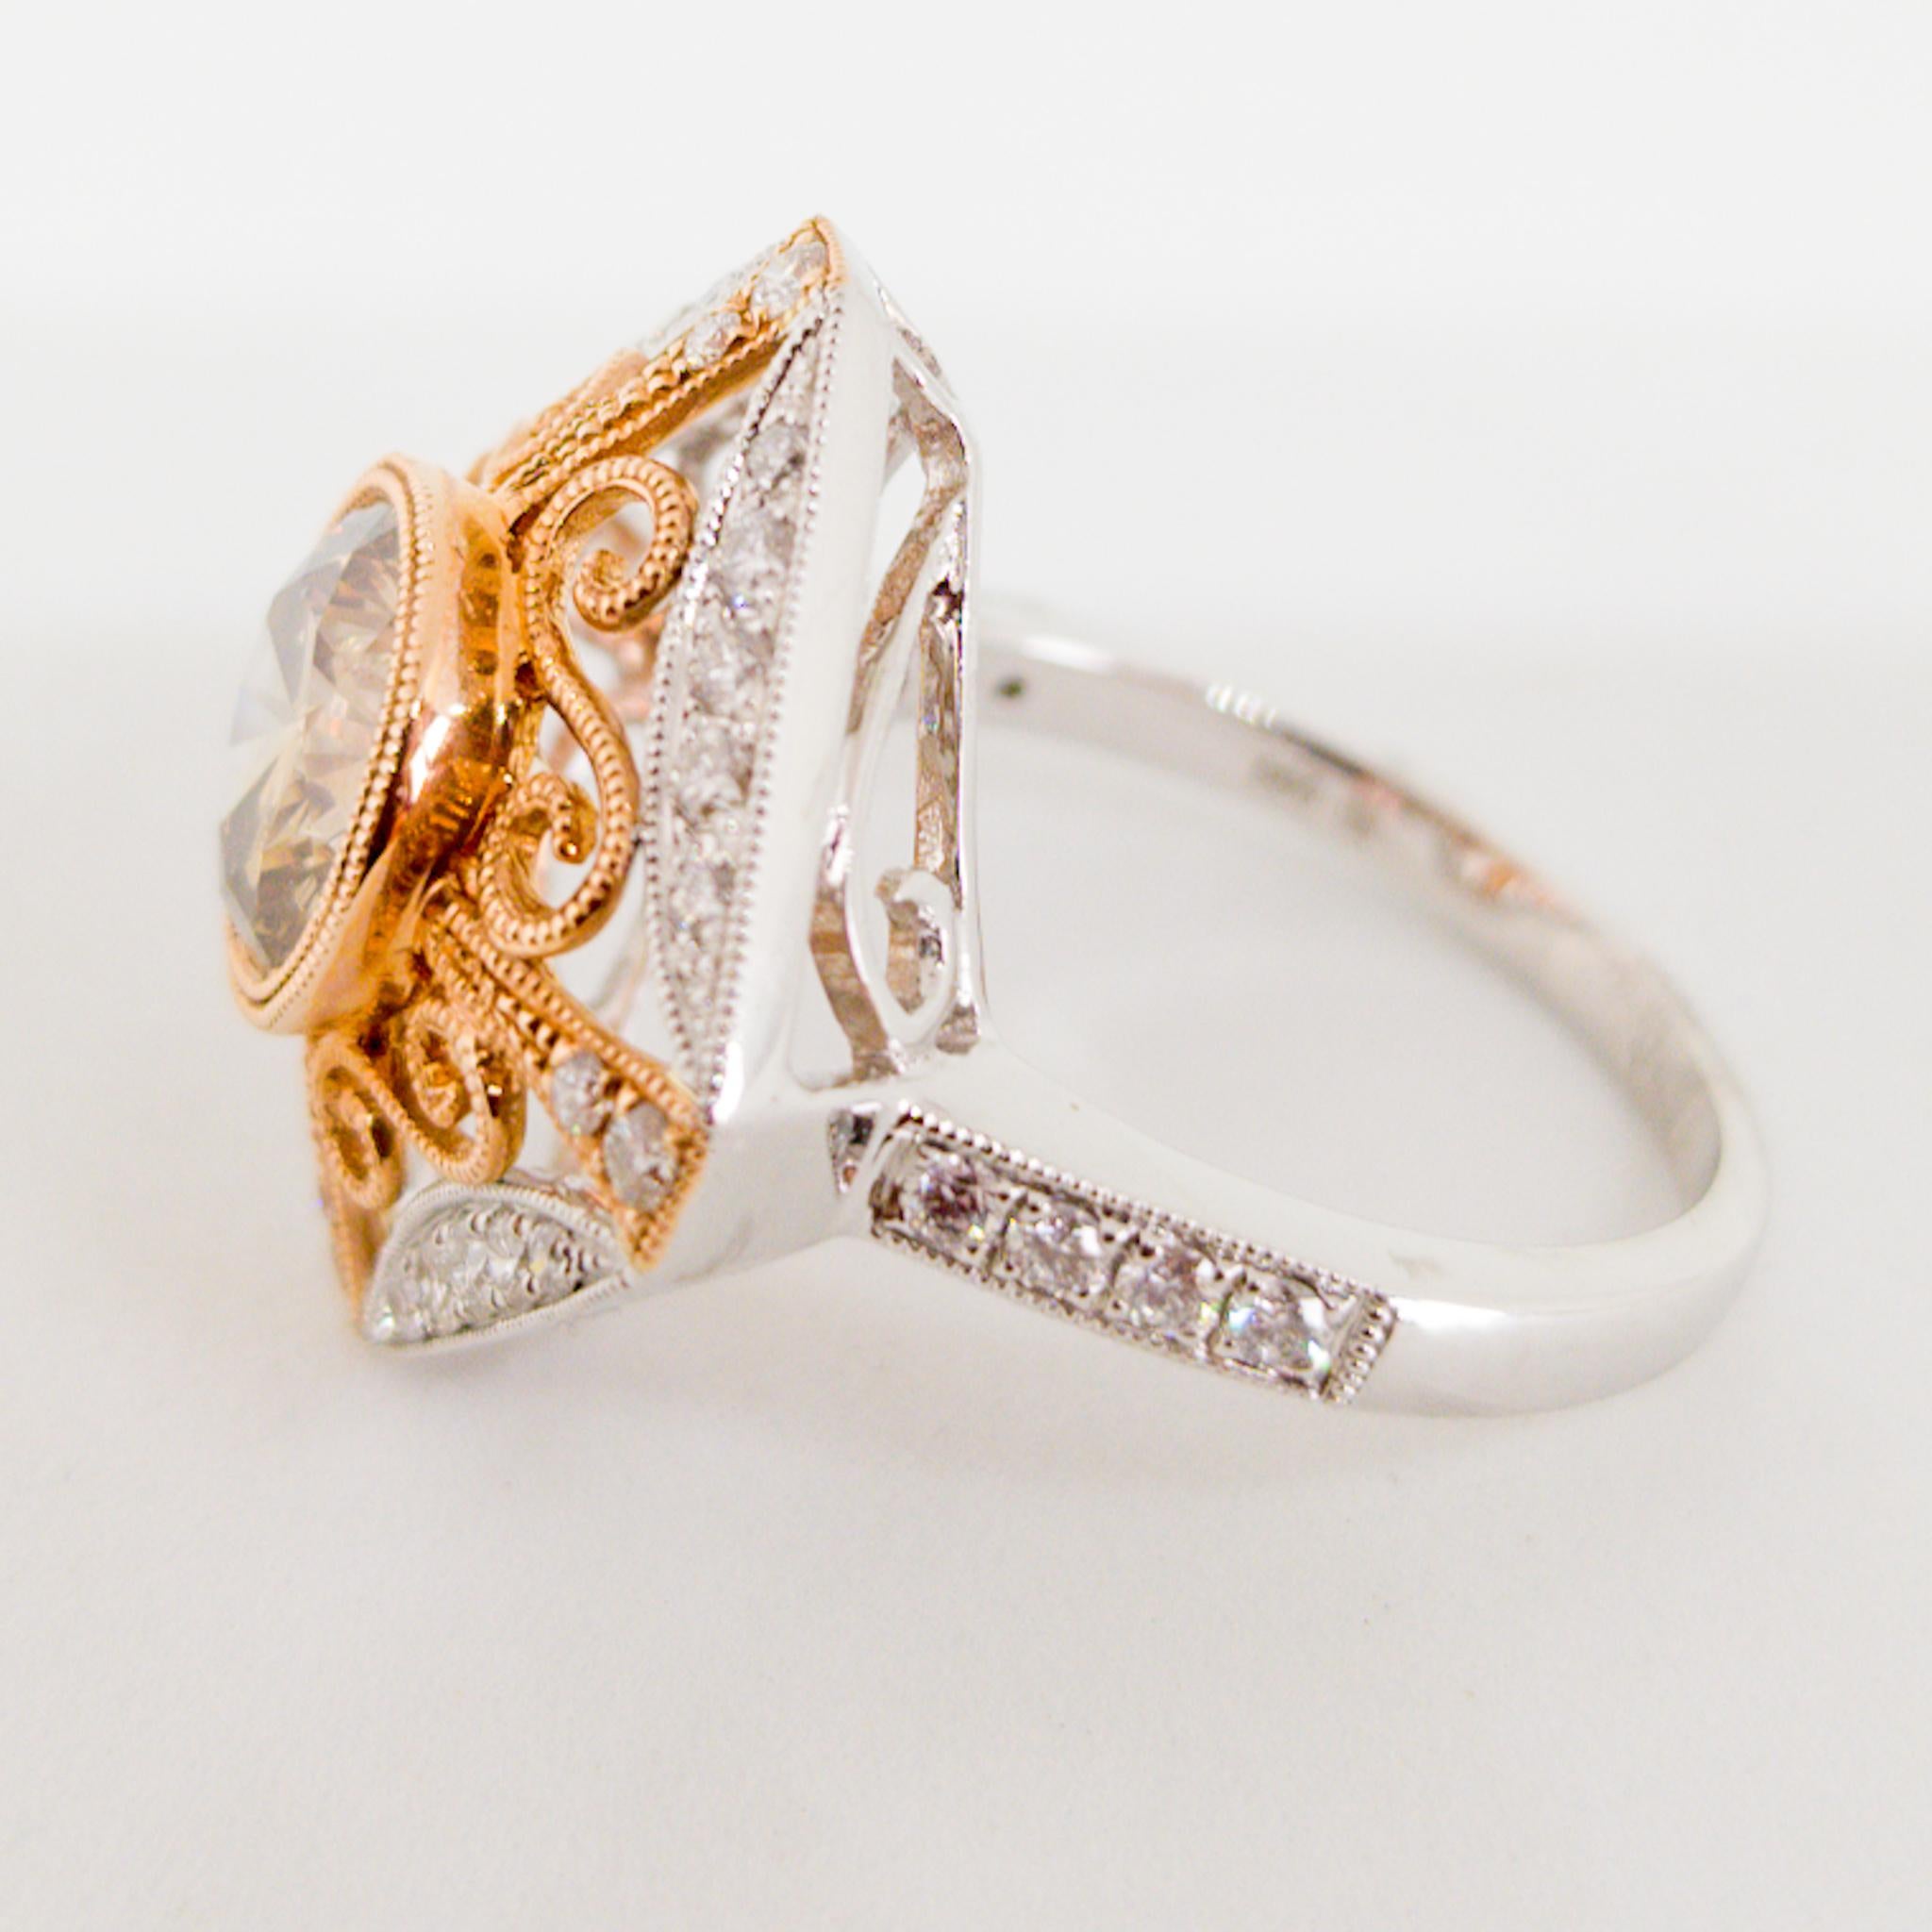 Natural Fancy Champagne Diamond Ring 2.26 Carat Filigree White and Rose Gold For Sale 1